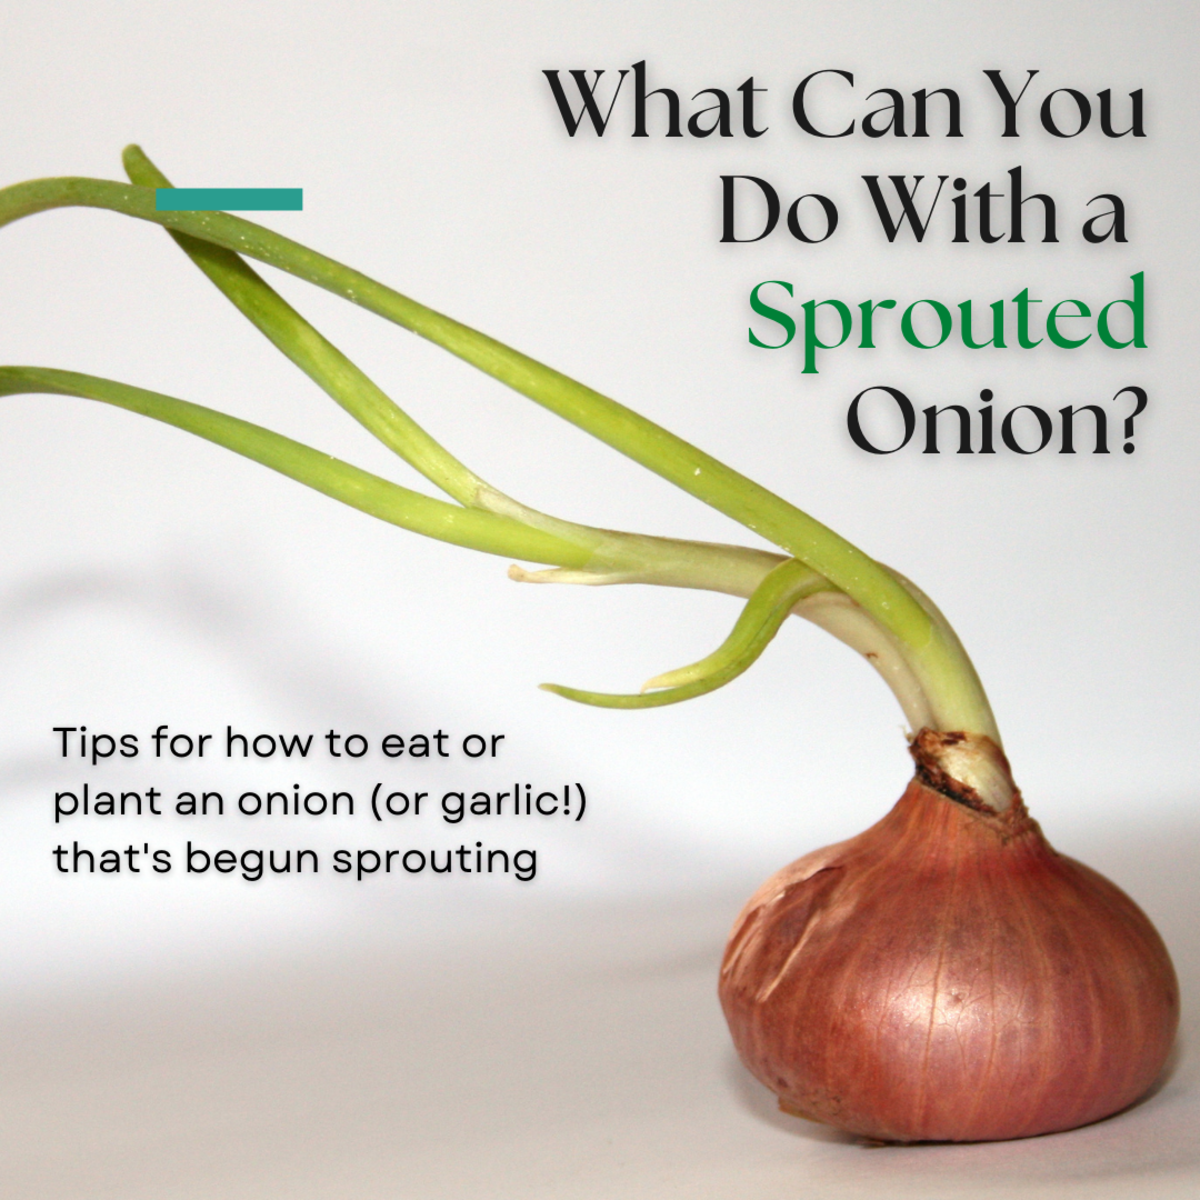 Is it safe to eat a sprouted onion?